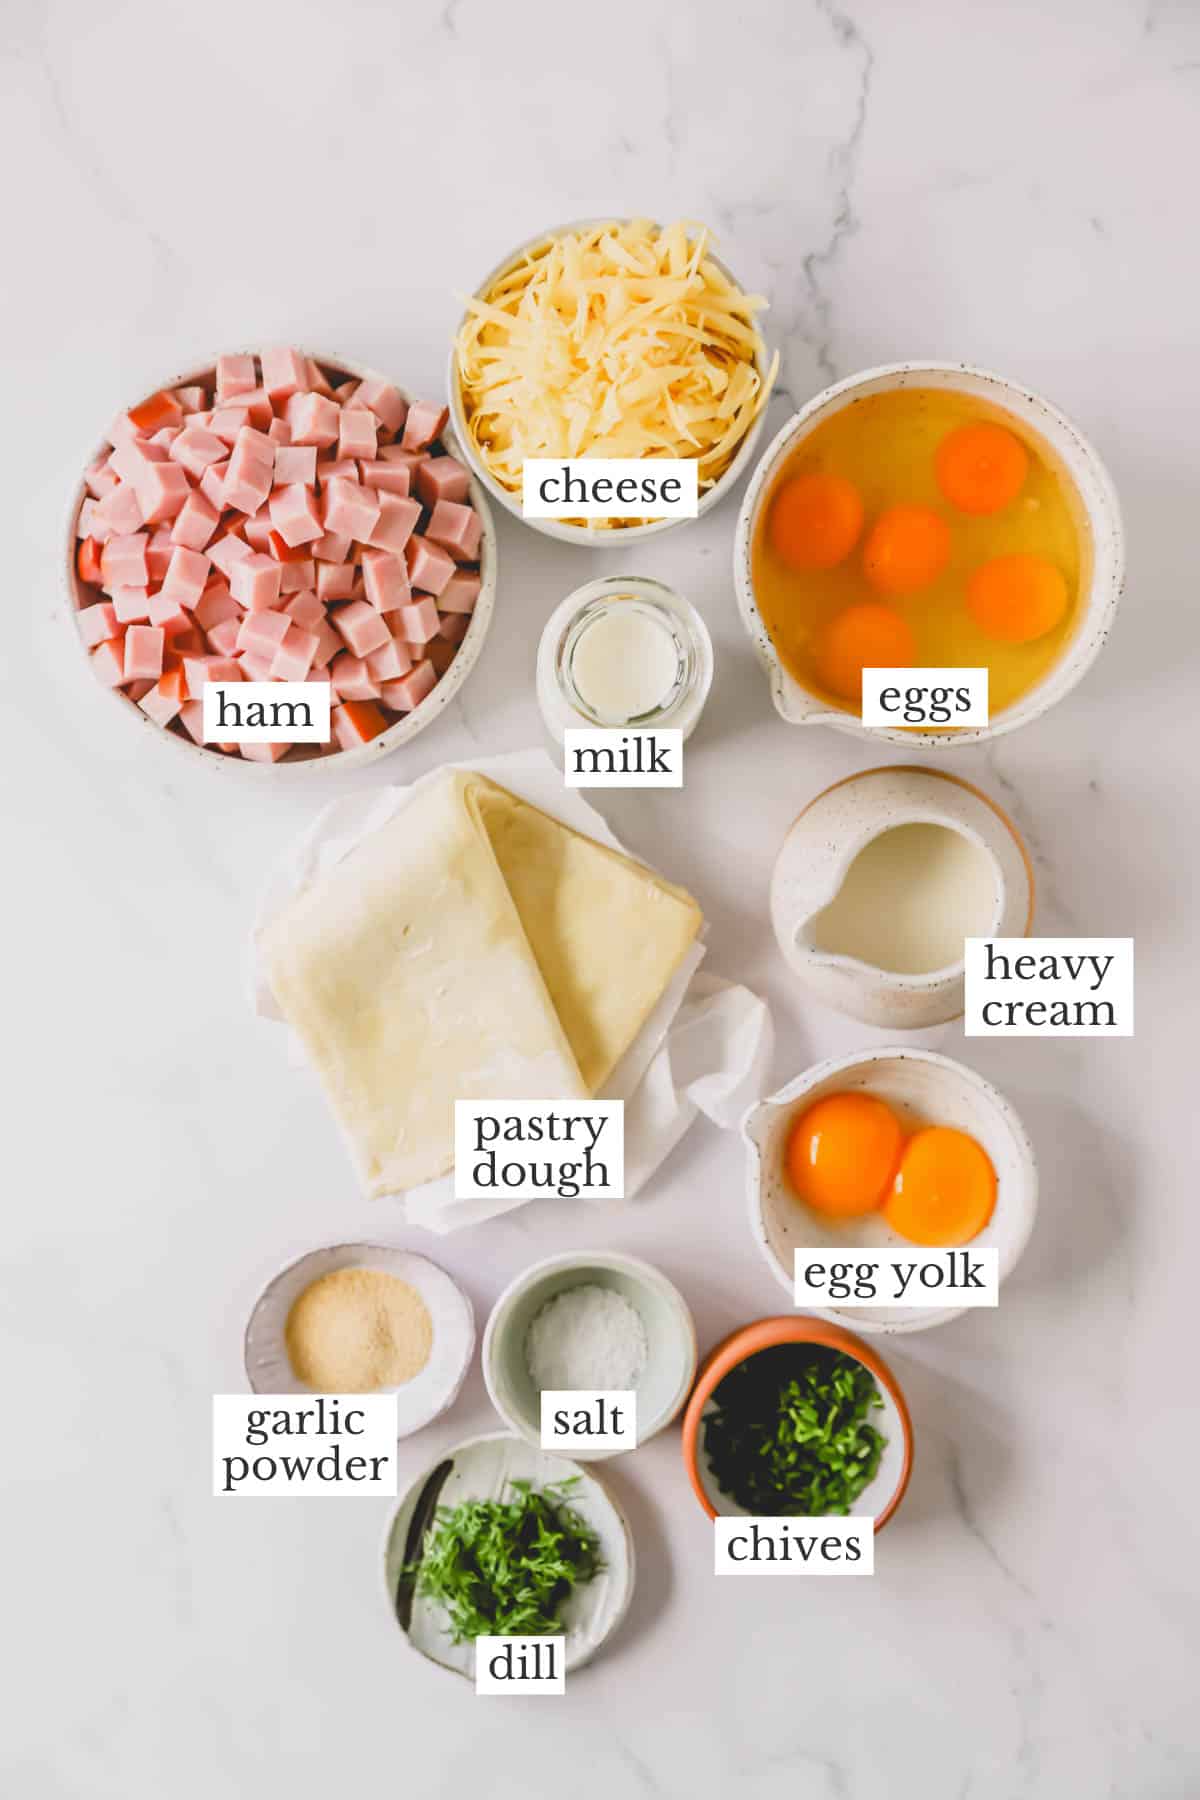 Ingredients to make ham and cheese quiche.